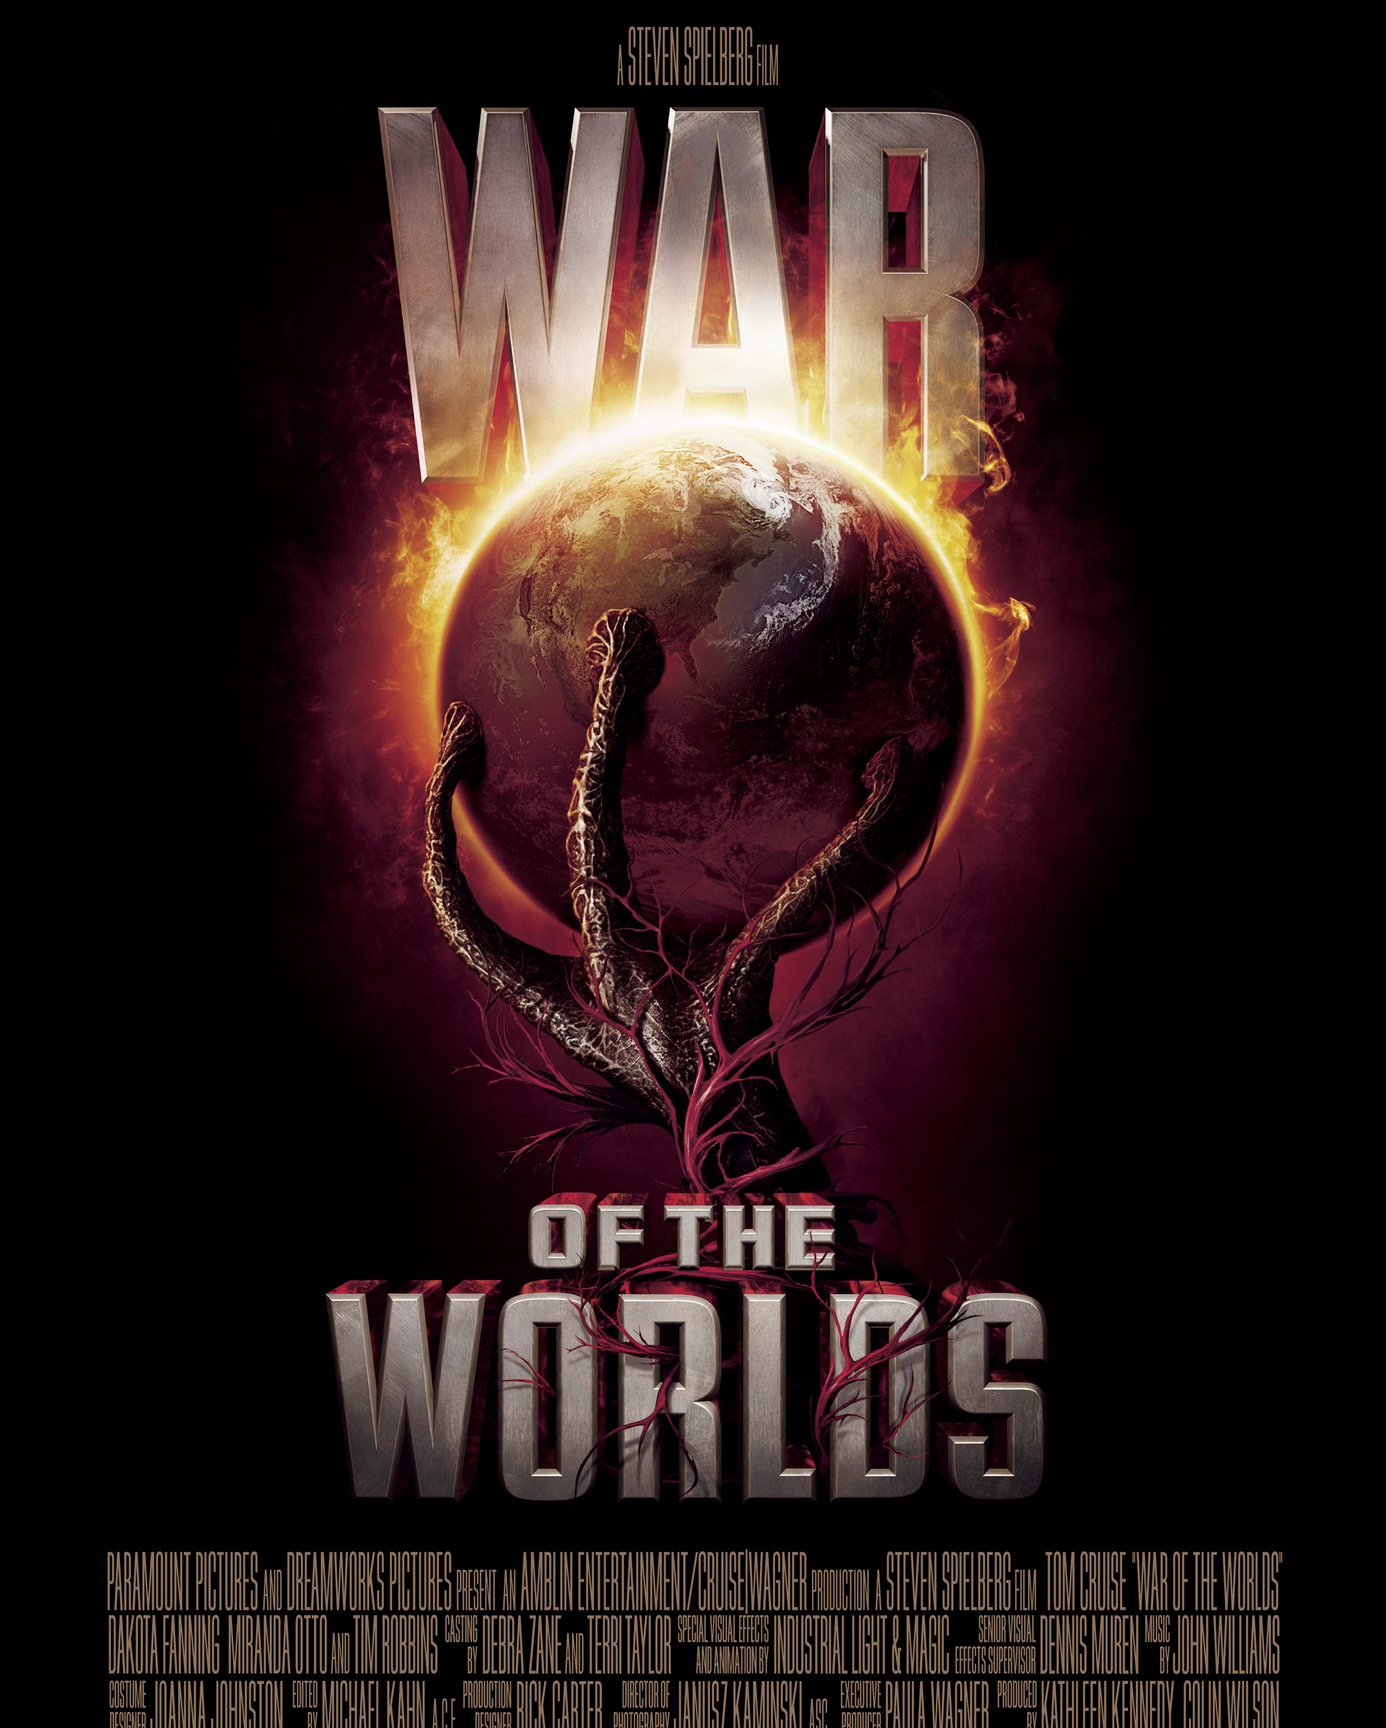 The War of the Worlds Poster